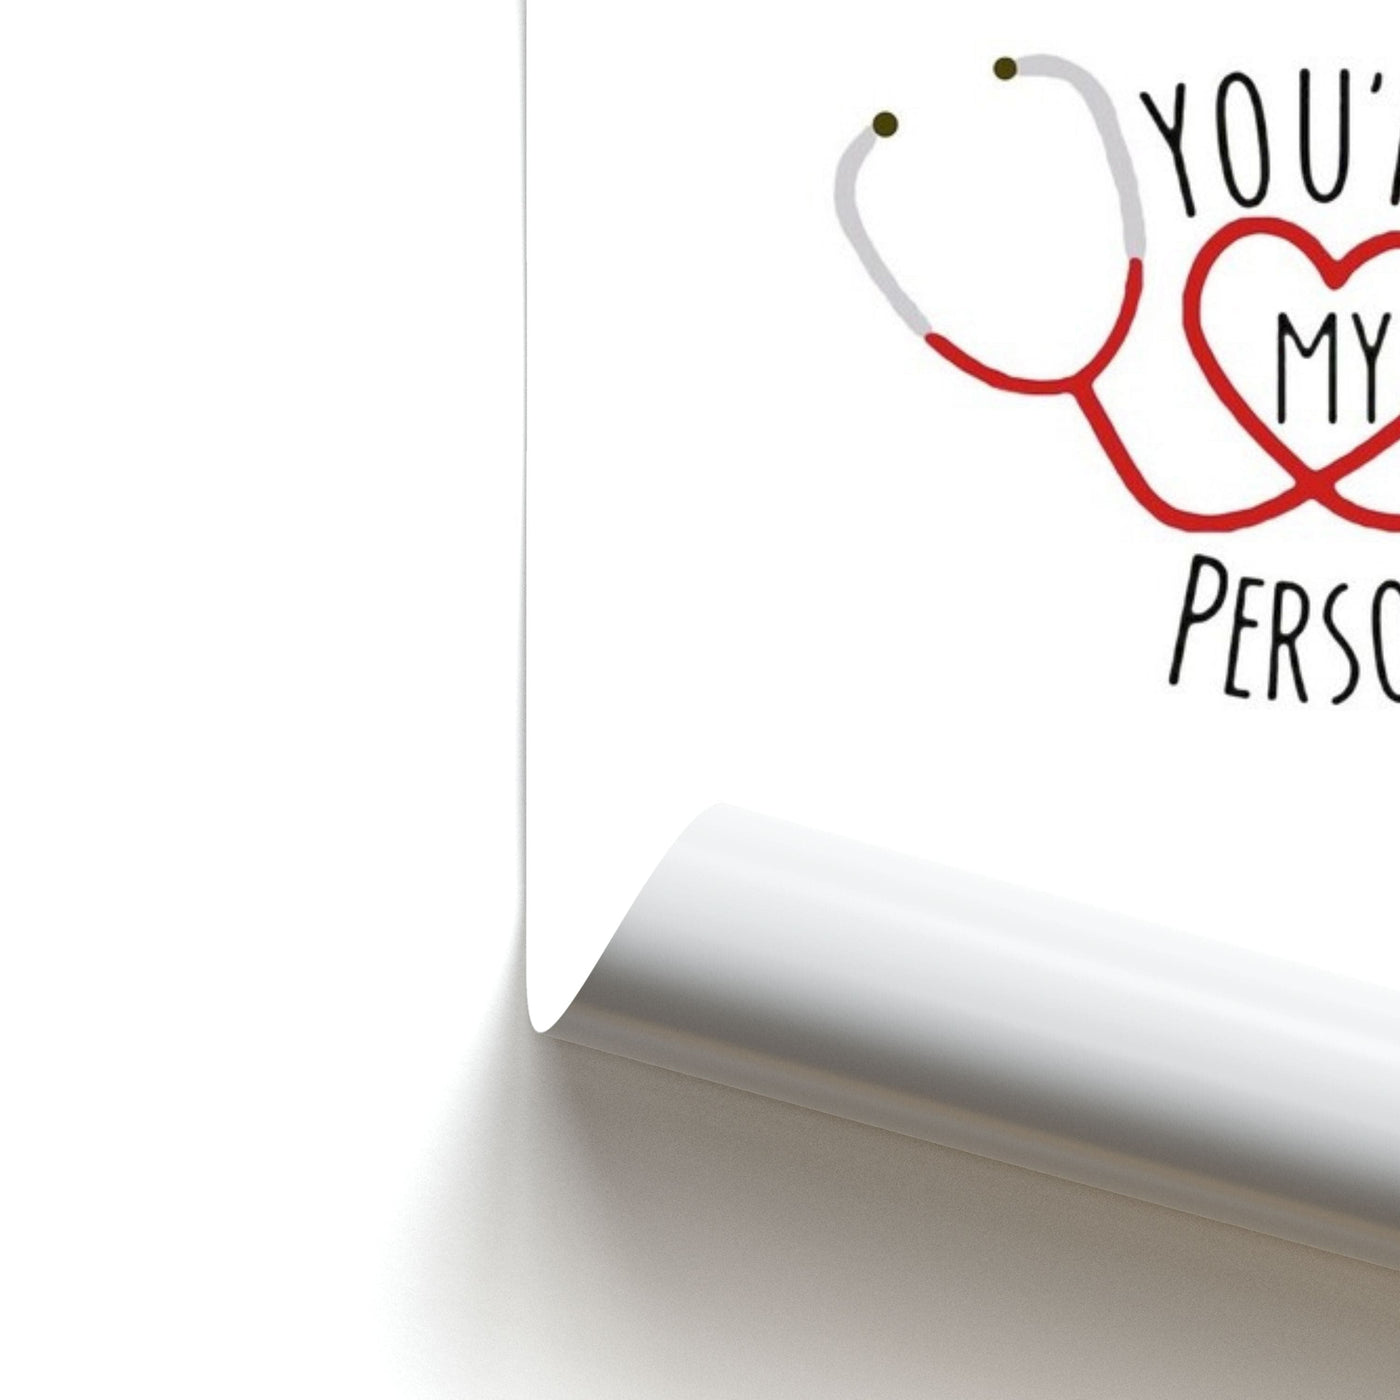 You're My Person - Grey's Anatomy Poster